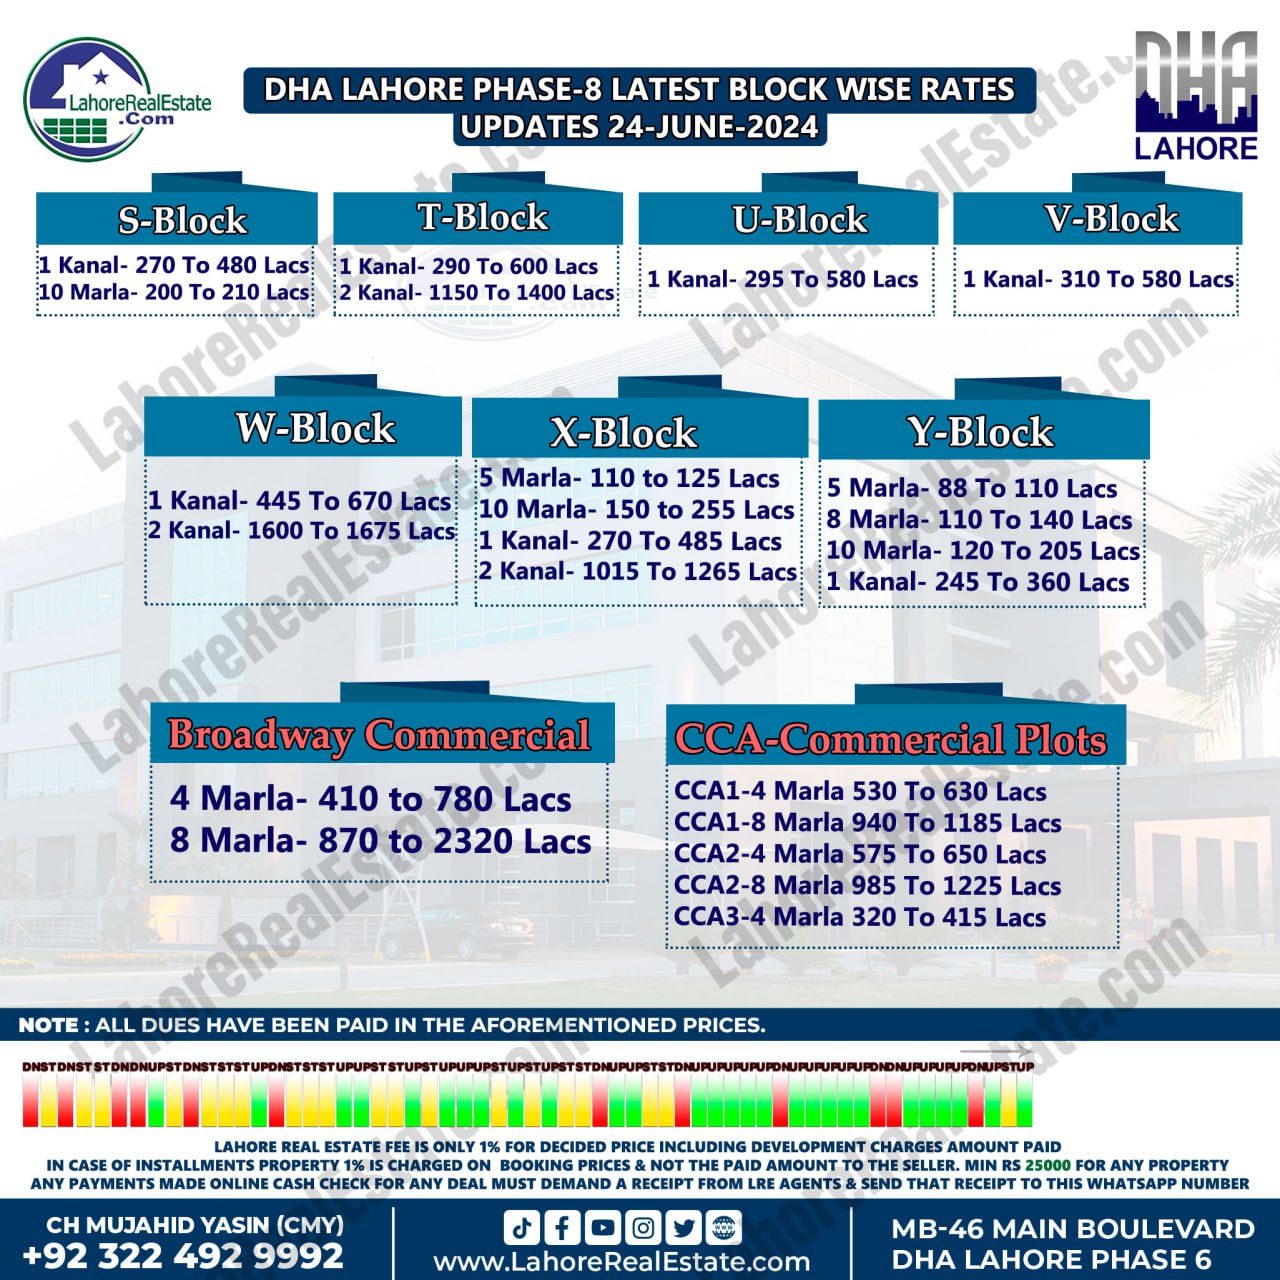 DHA Lahore Phase 8 Plot Prices Blockwise Rates June 24, 2024